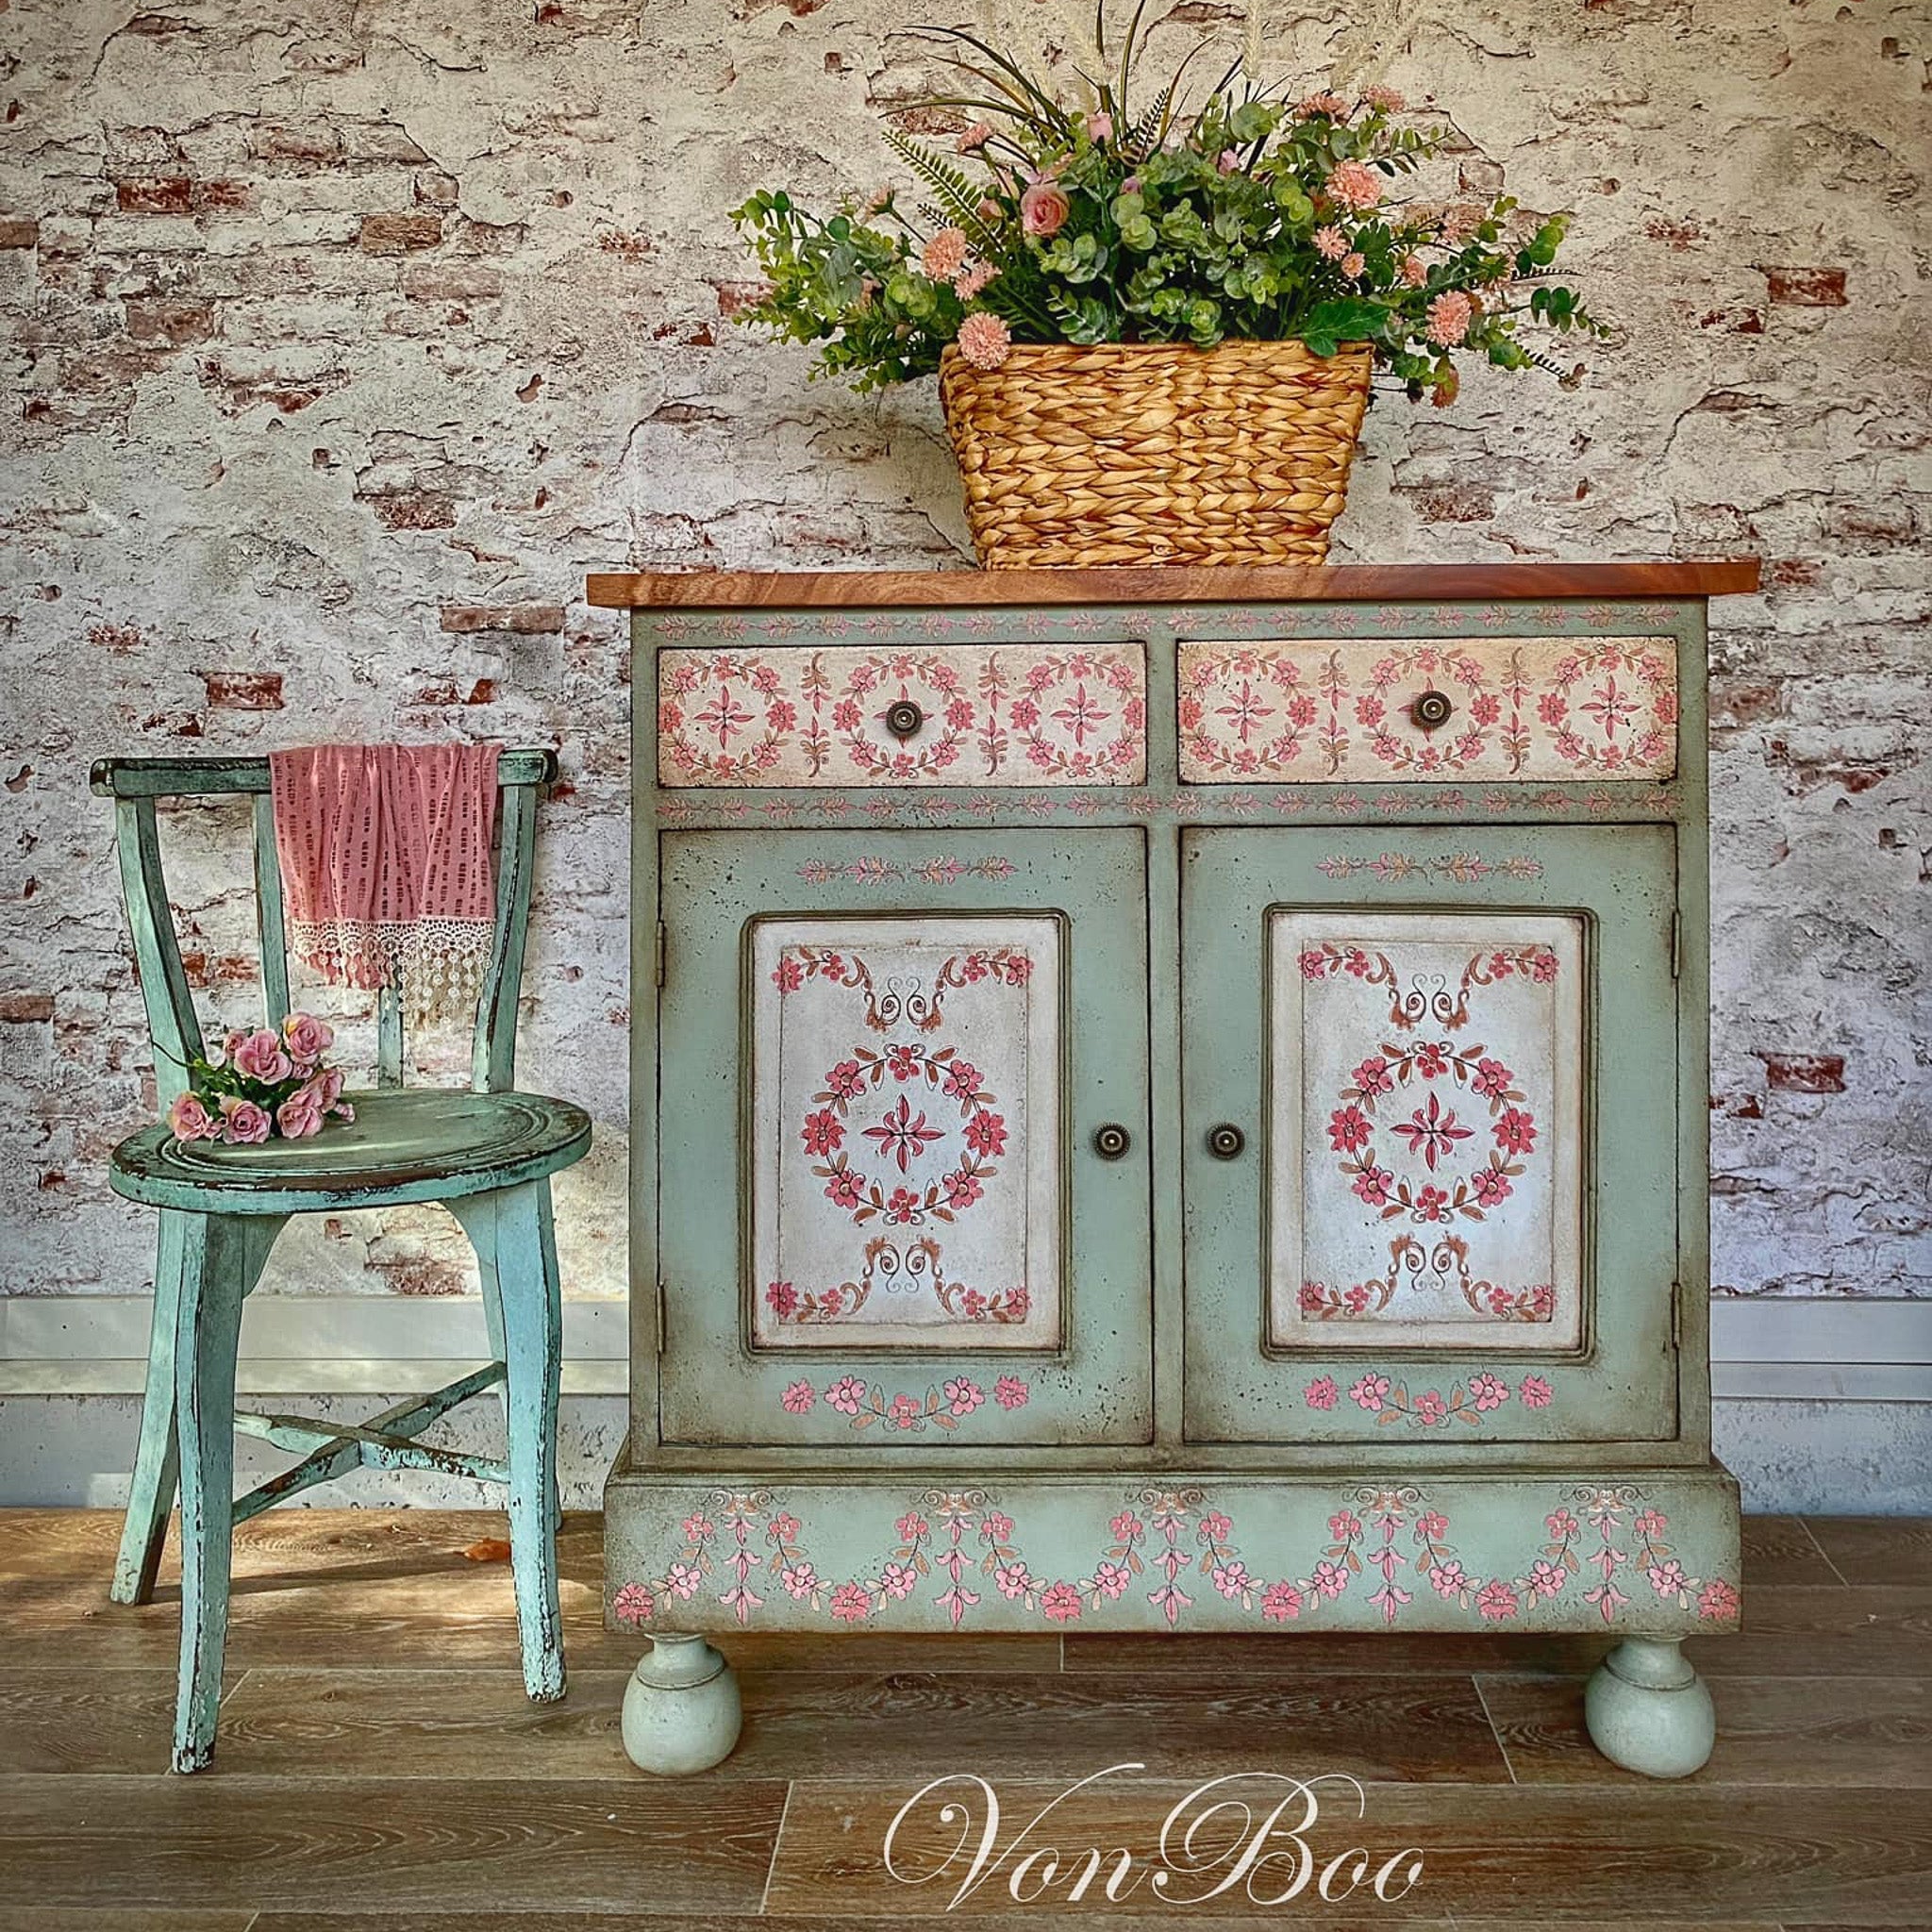 A vintage storage console refurbished by Von Boo is painted pale green and features ReDesign with Prima's Annie Sloan Flower Garland rub-on transfer on the front.